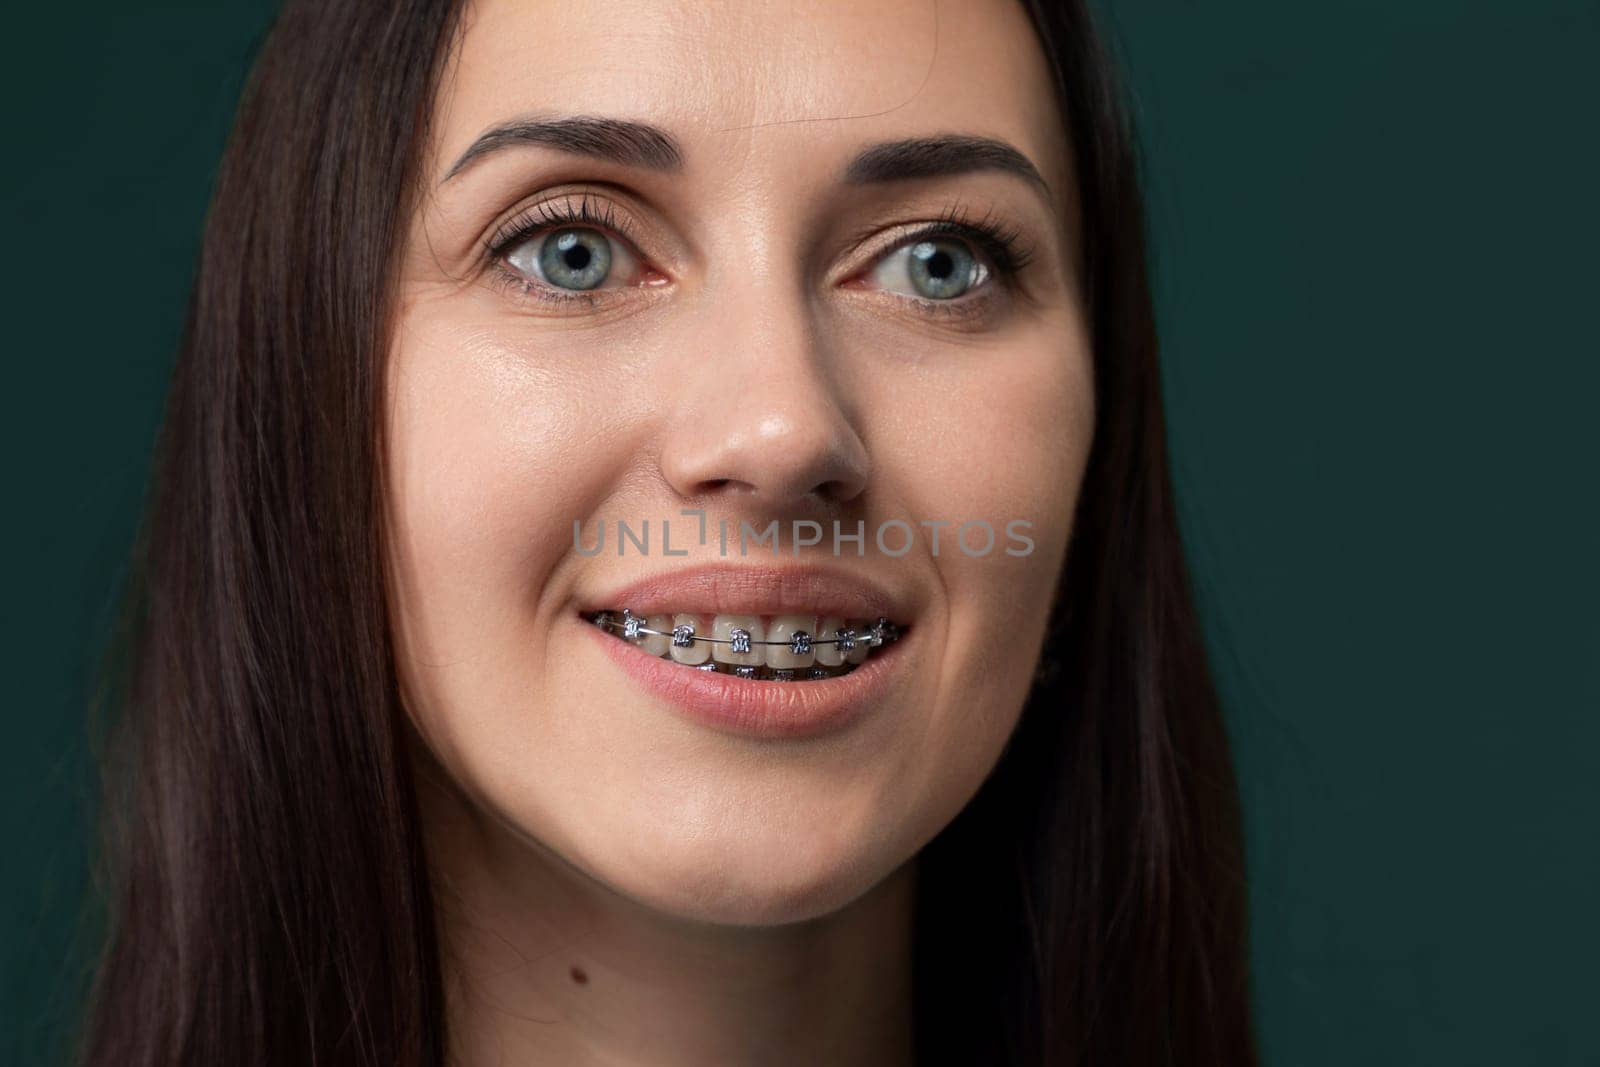 A woman with braces on her teeth smiles brightly, showcasing her dental braces. Her teeth appear straight and aligned, contributing to her confident smile.